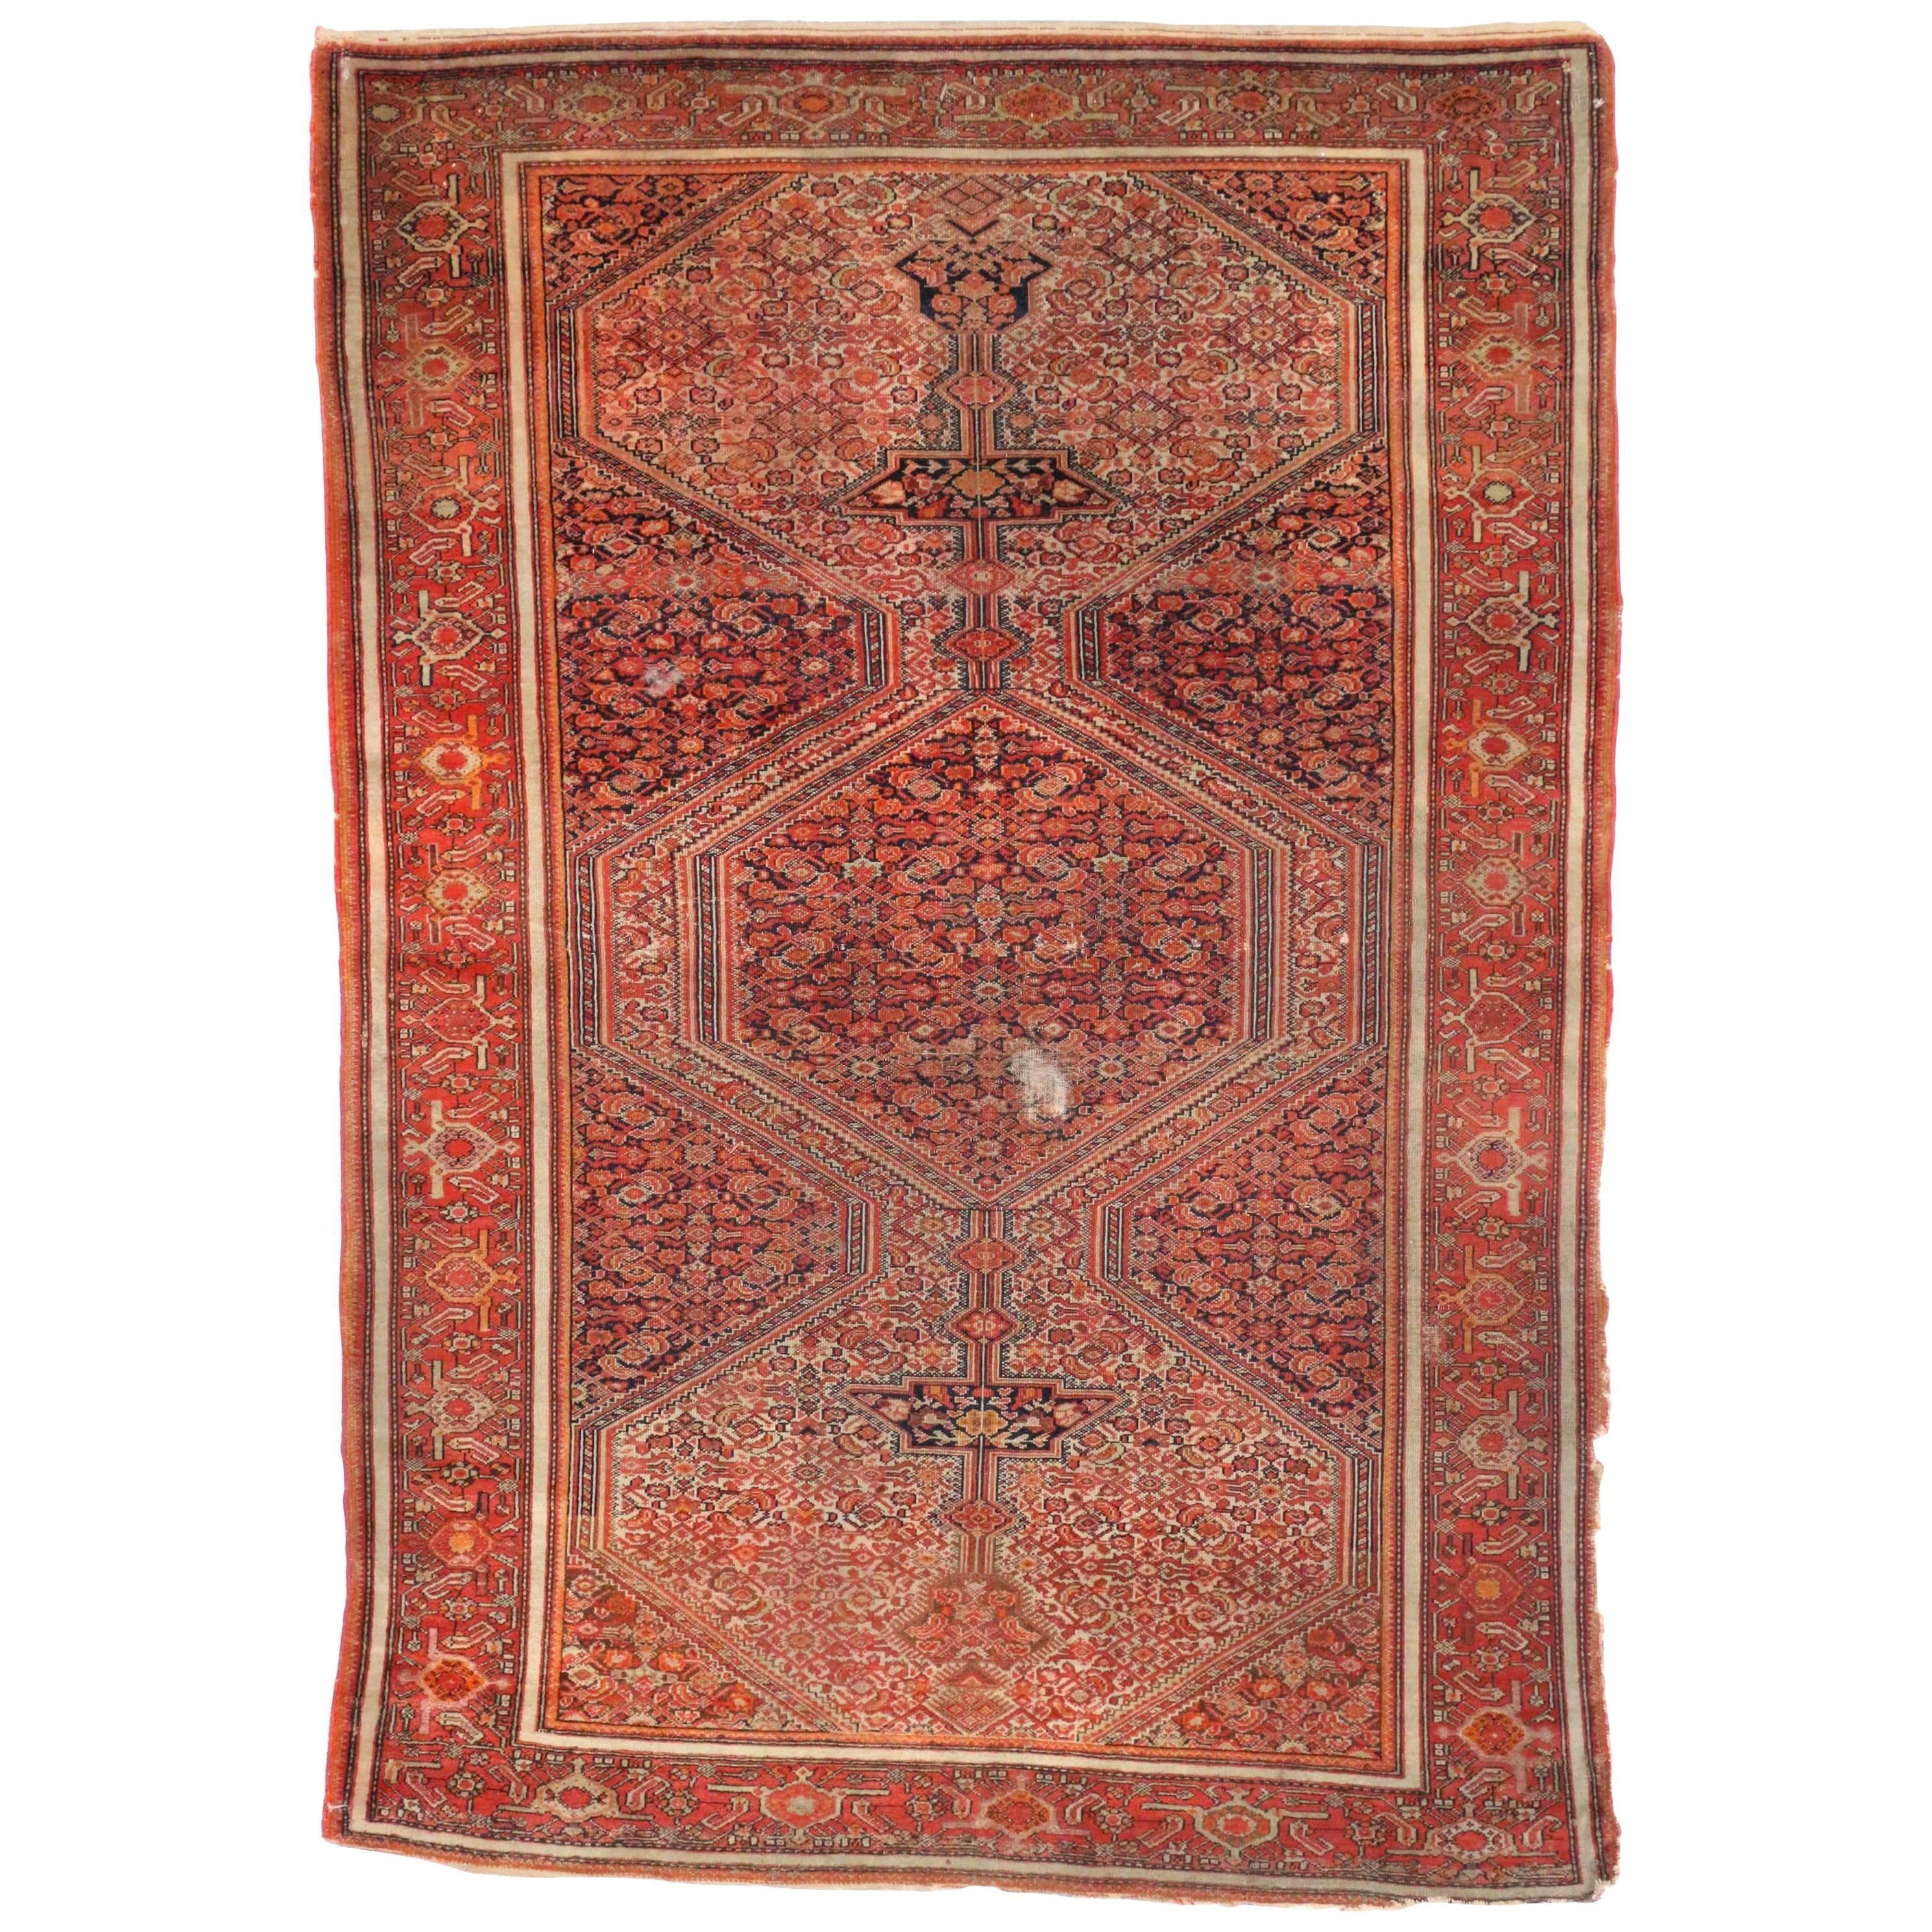 Worn Antique Persian Malayer Rug, Weathered Beauty